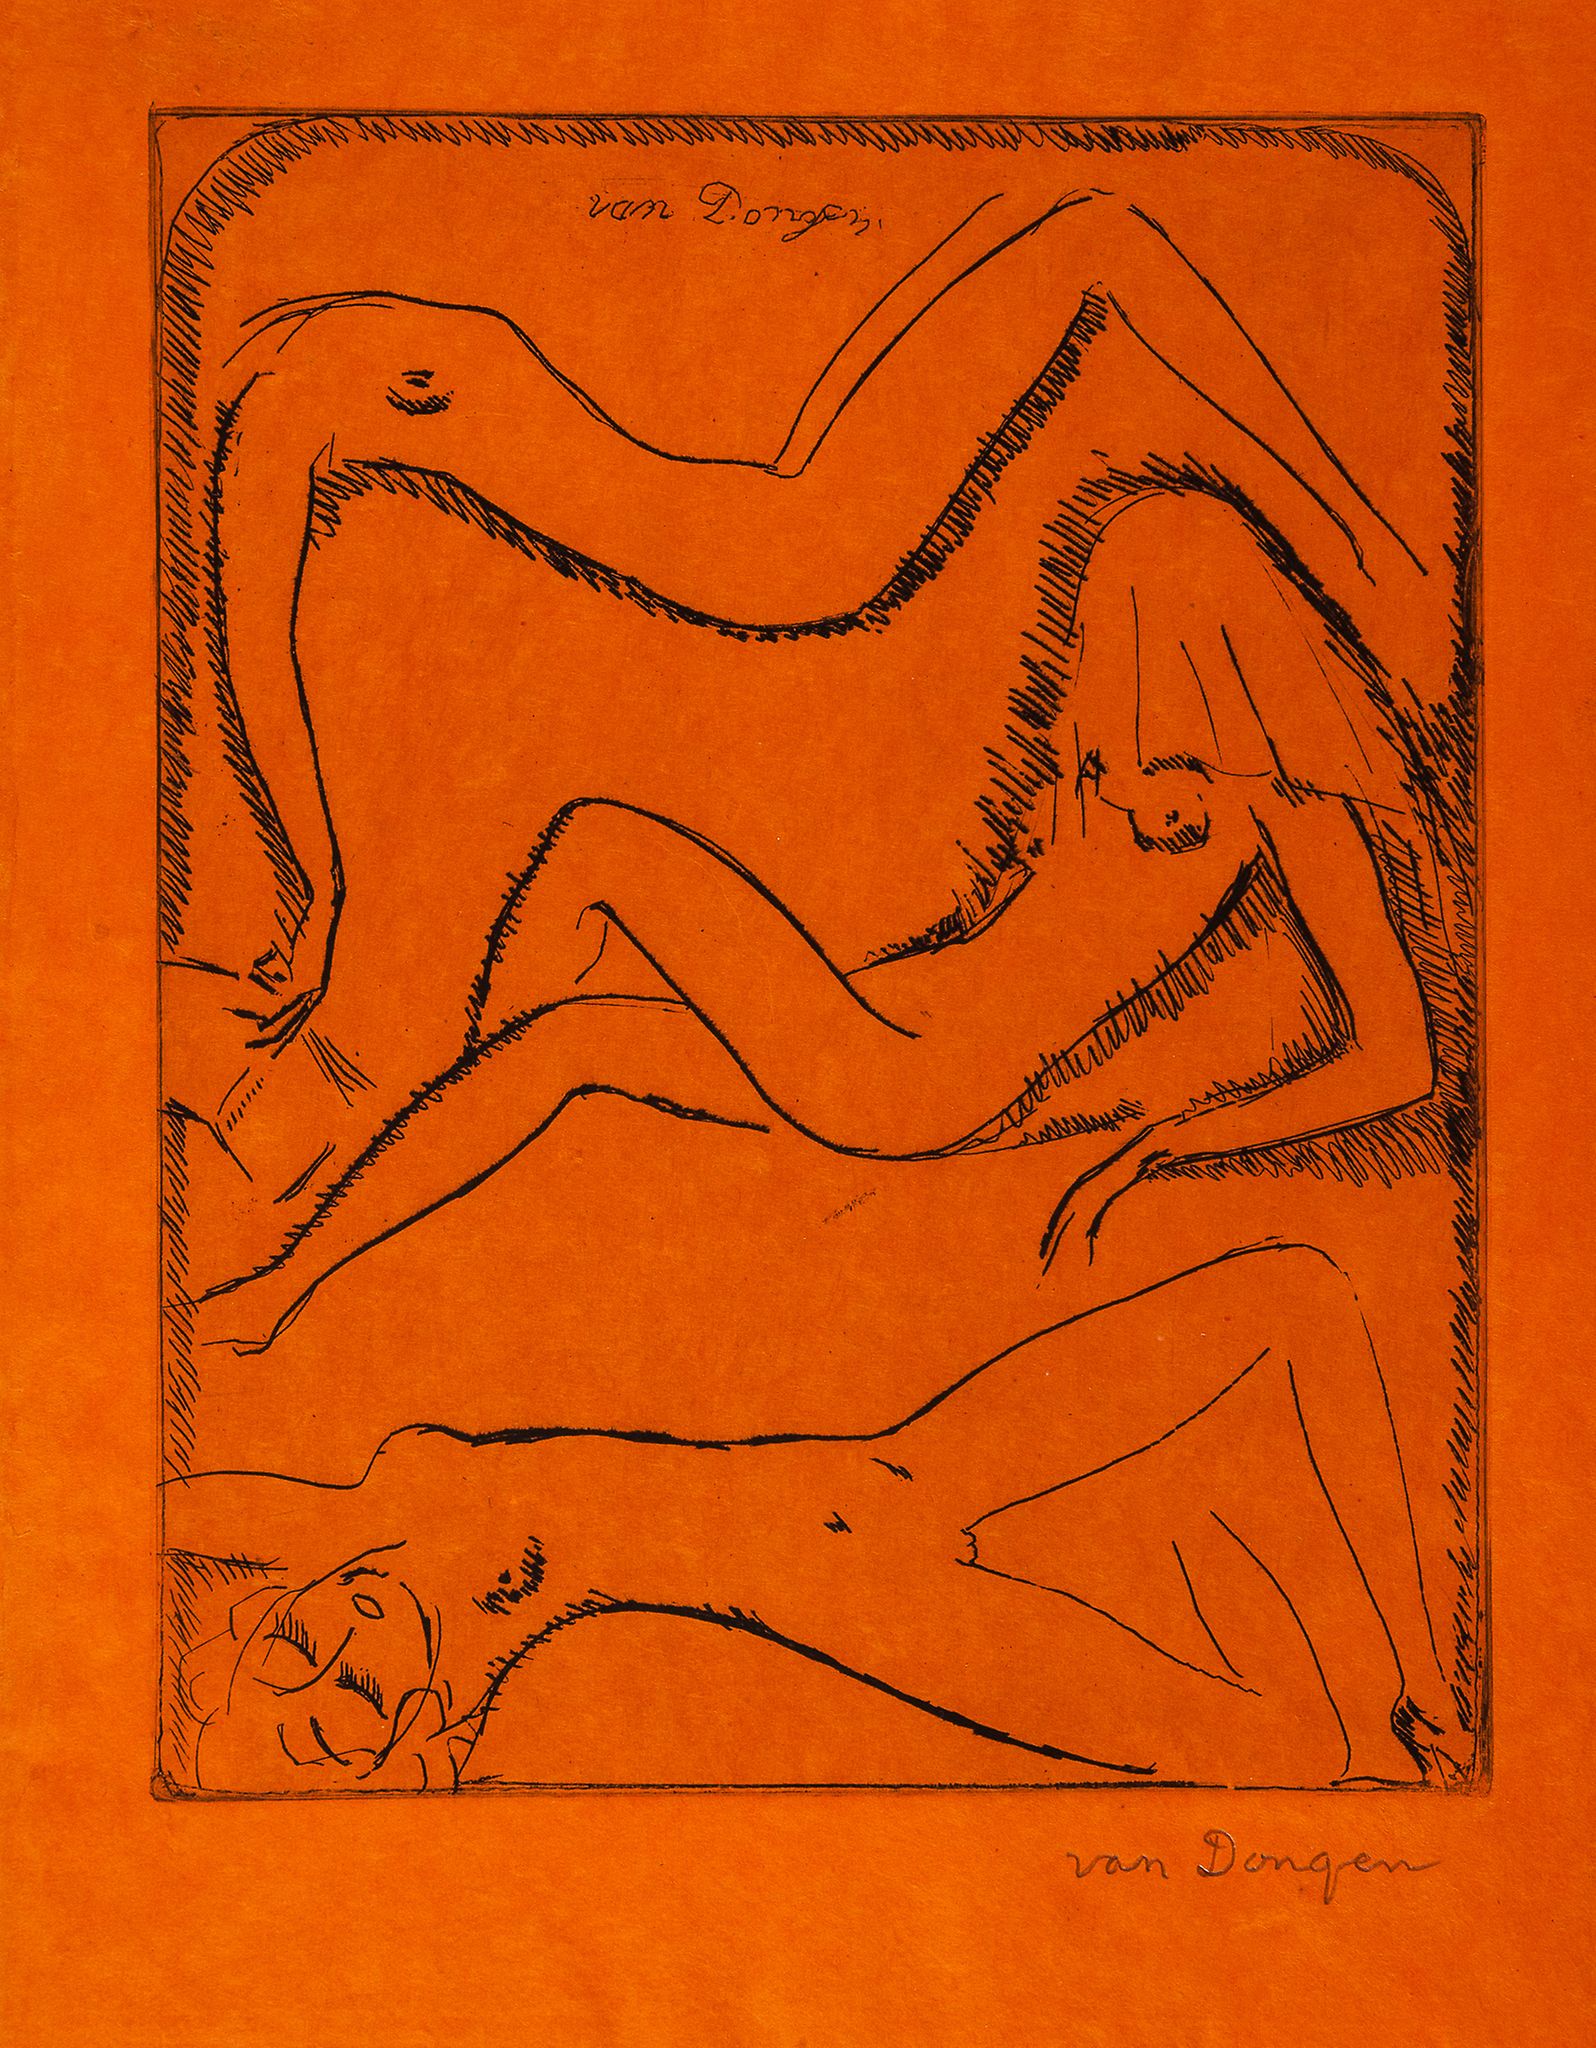 Kees van Dongen (1877-1968) - Three Reclining Female Nudes etching, 1925, signed in pencil, a